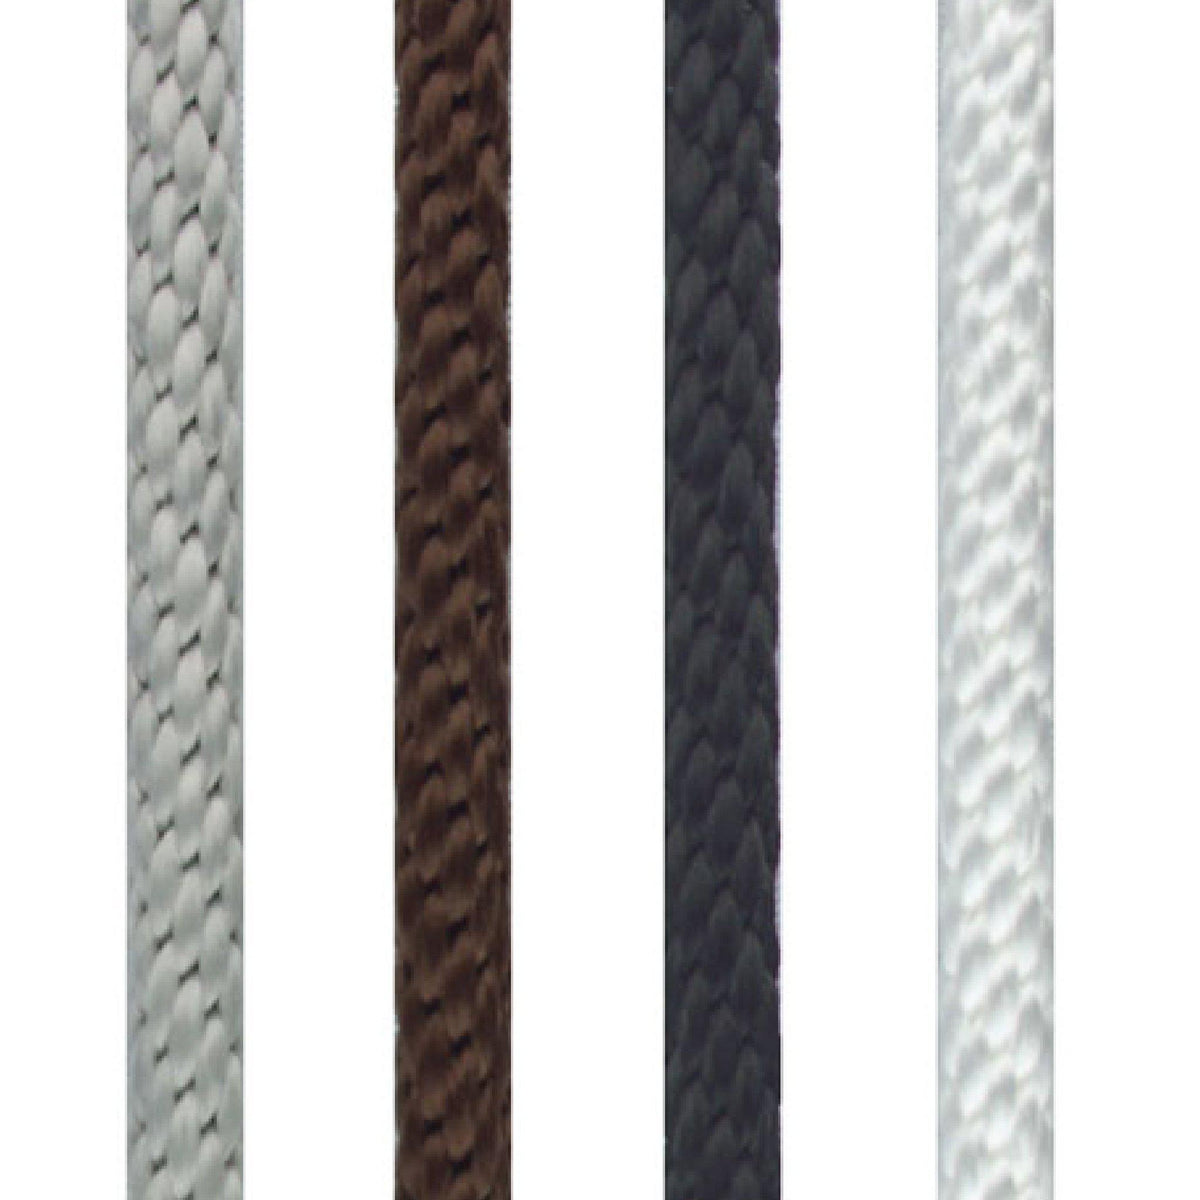 Polypropylene Rope-Accessories-Fly Me Flag